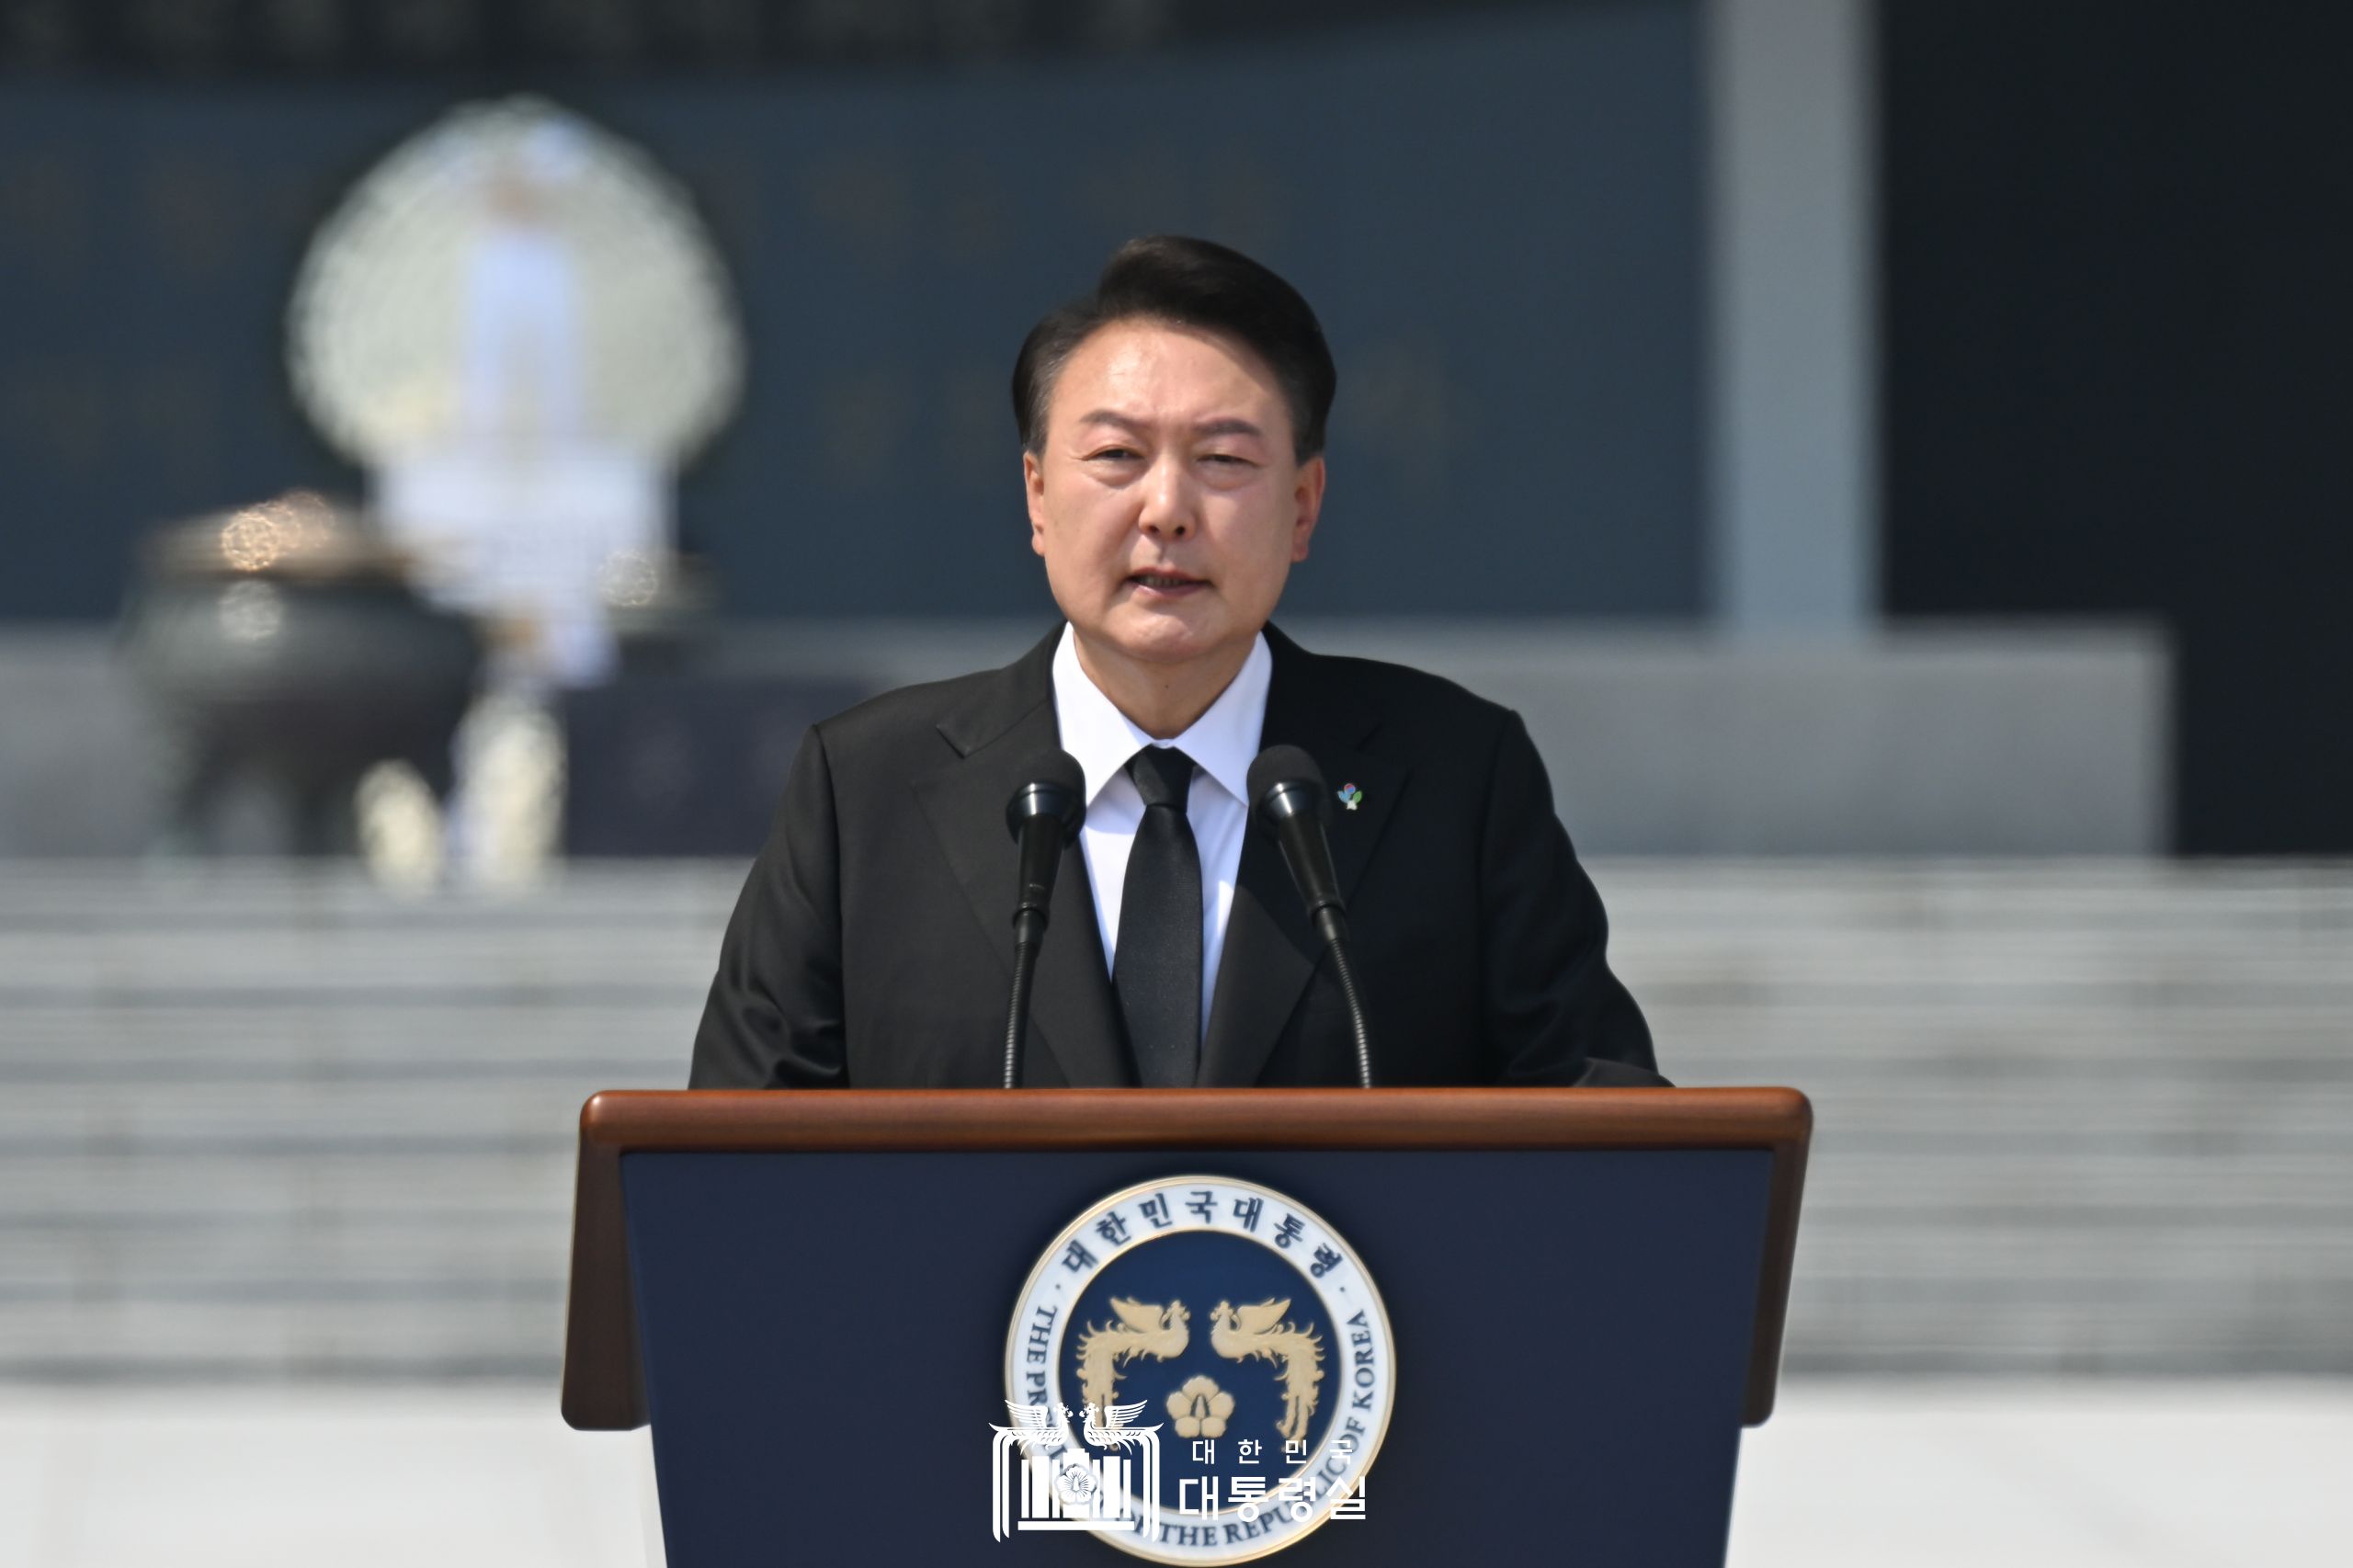 Address by President Yoon Suk Yeol on the 69th Memorial Day